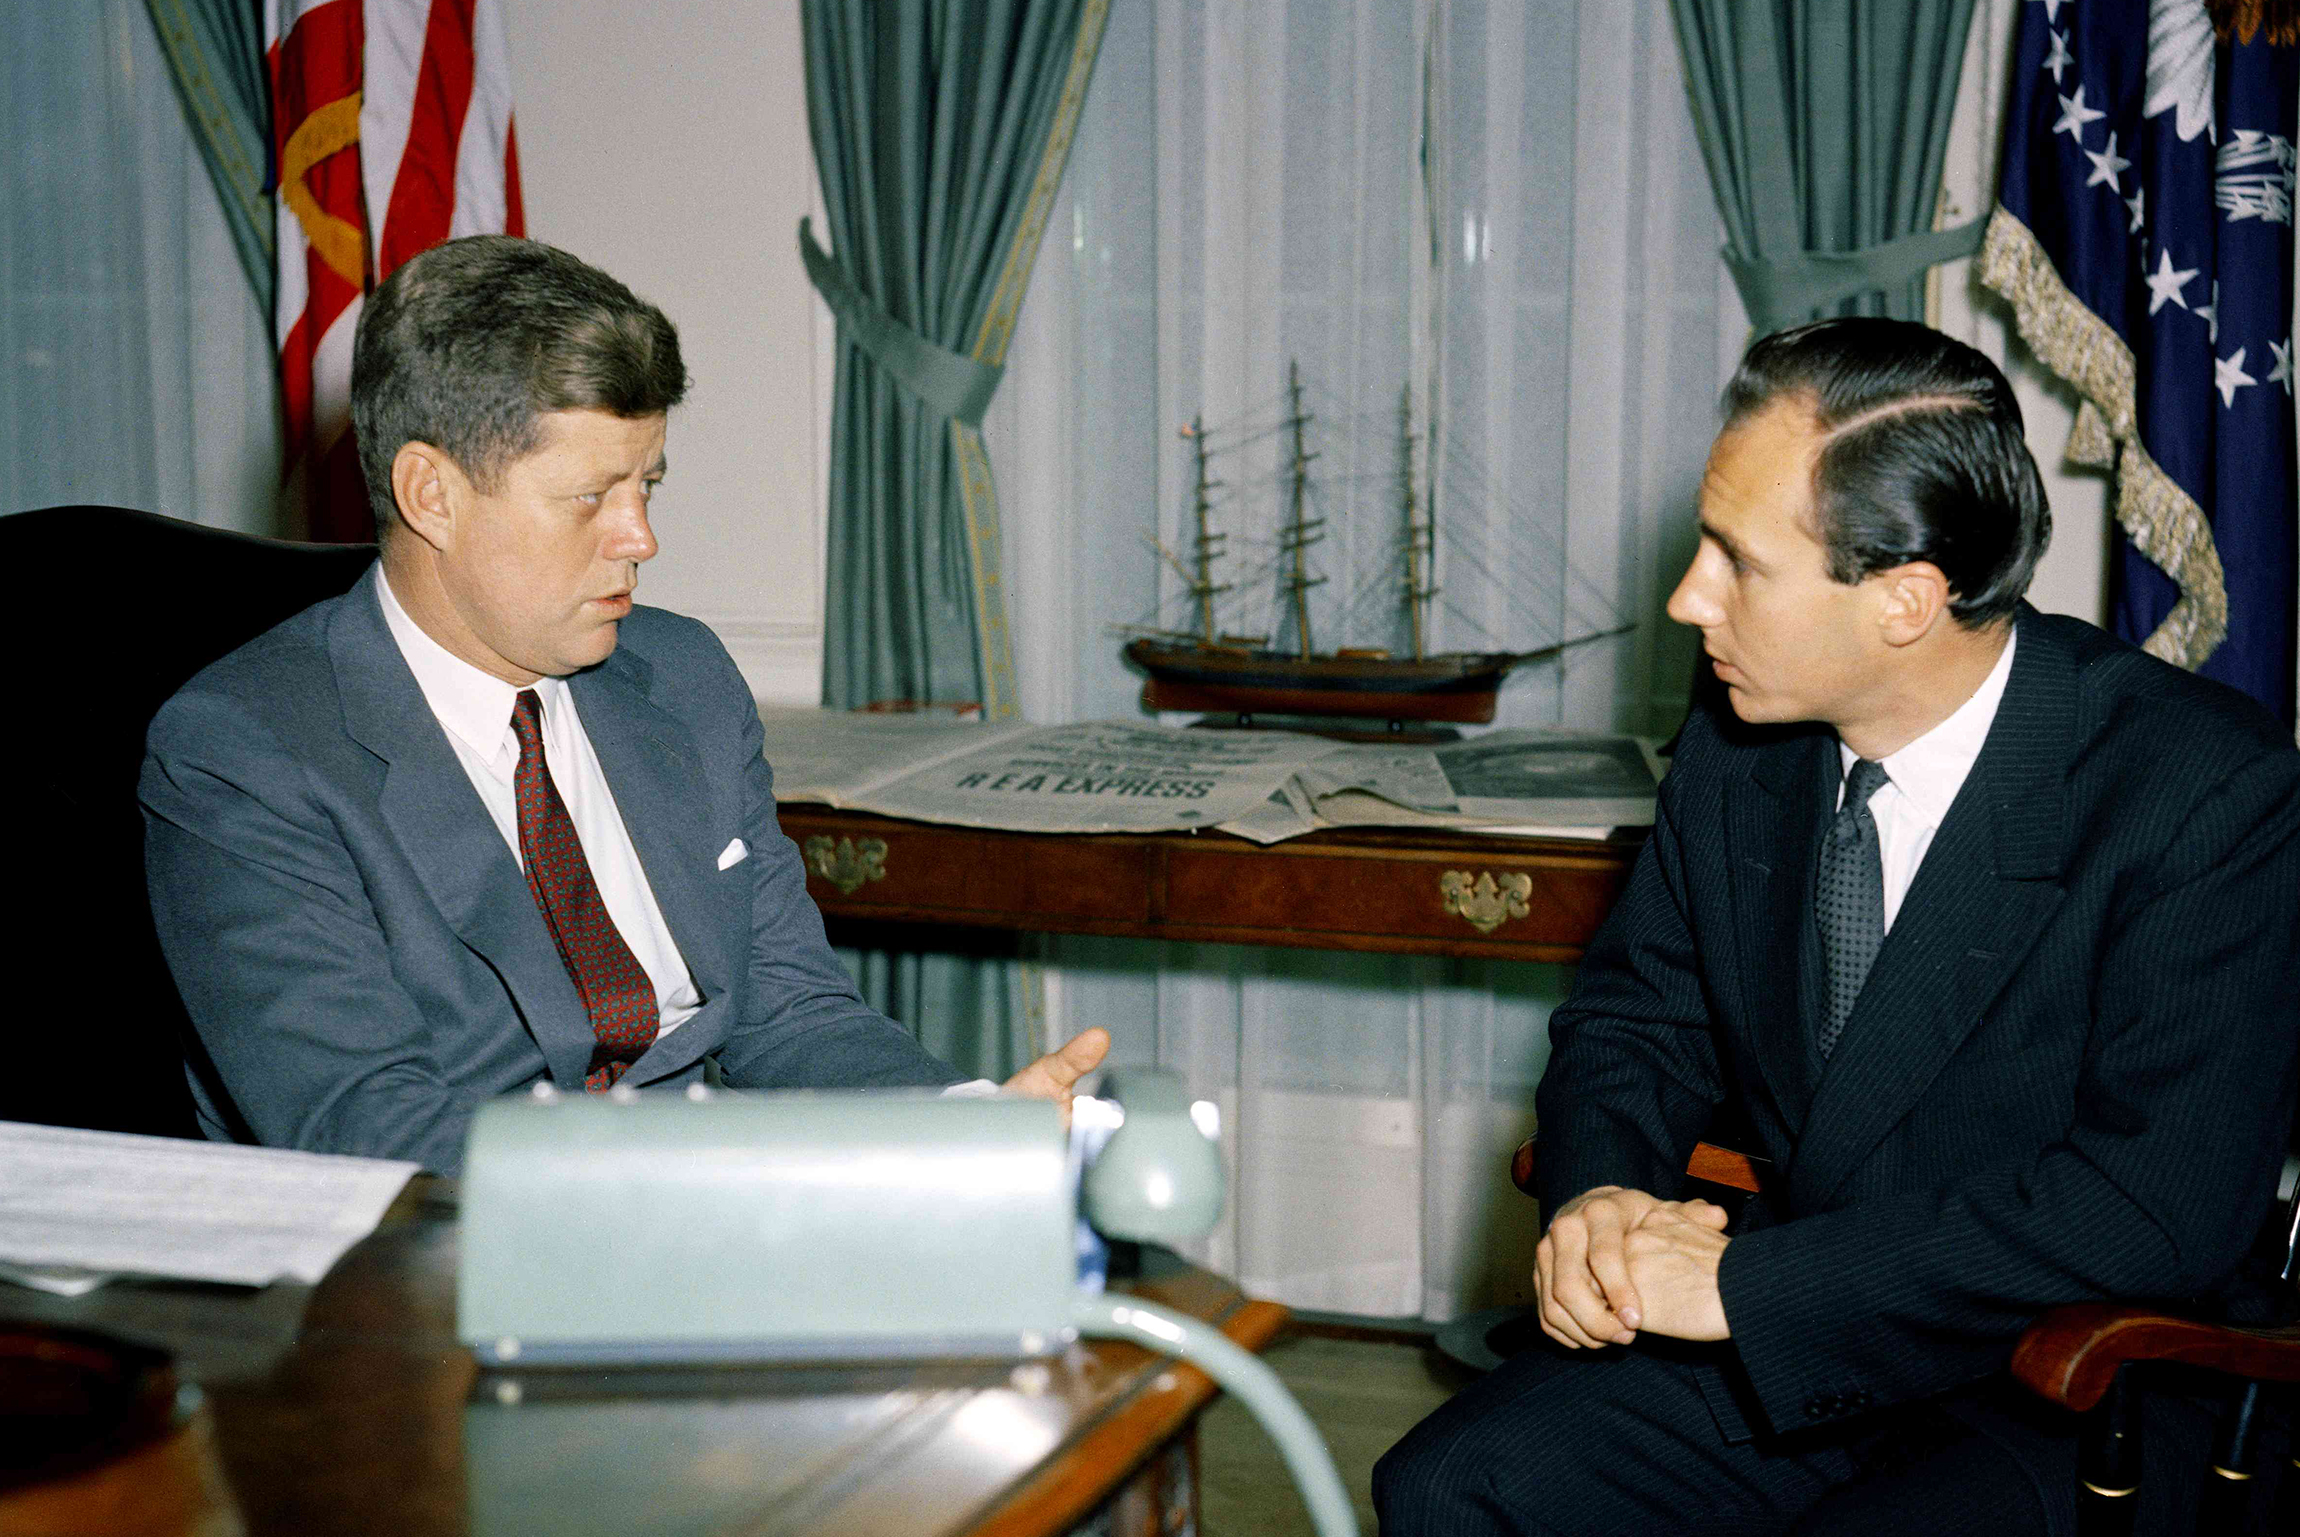 Meeting with President Kennedy in the Oval Office at the White House in 1961.